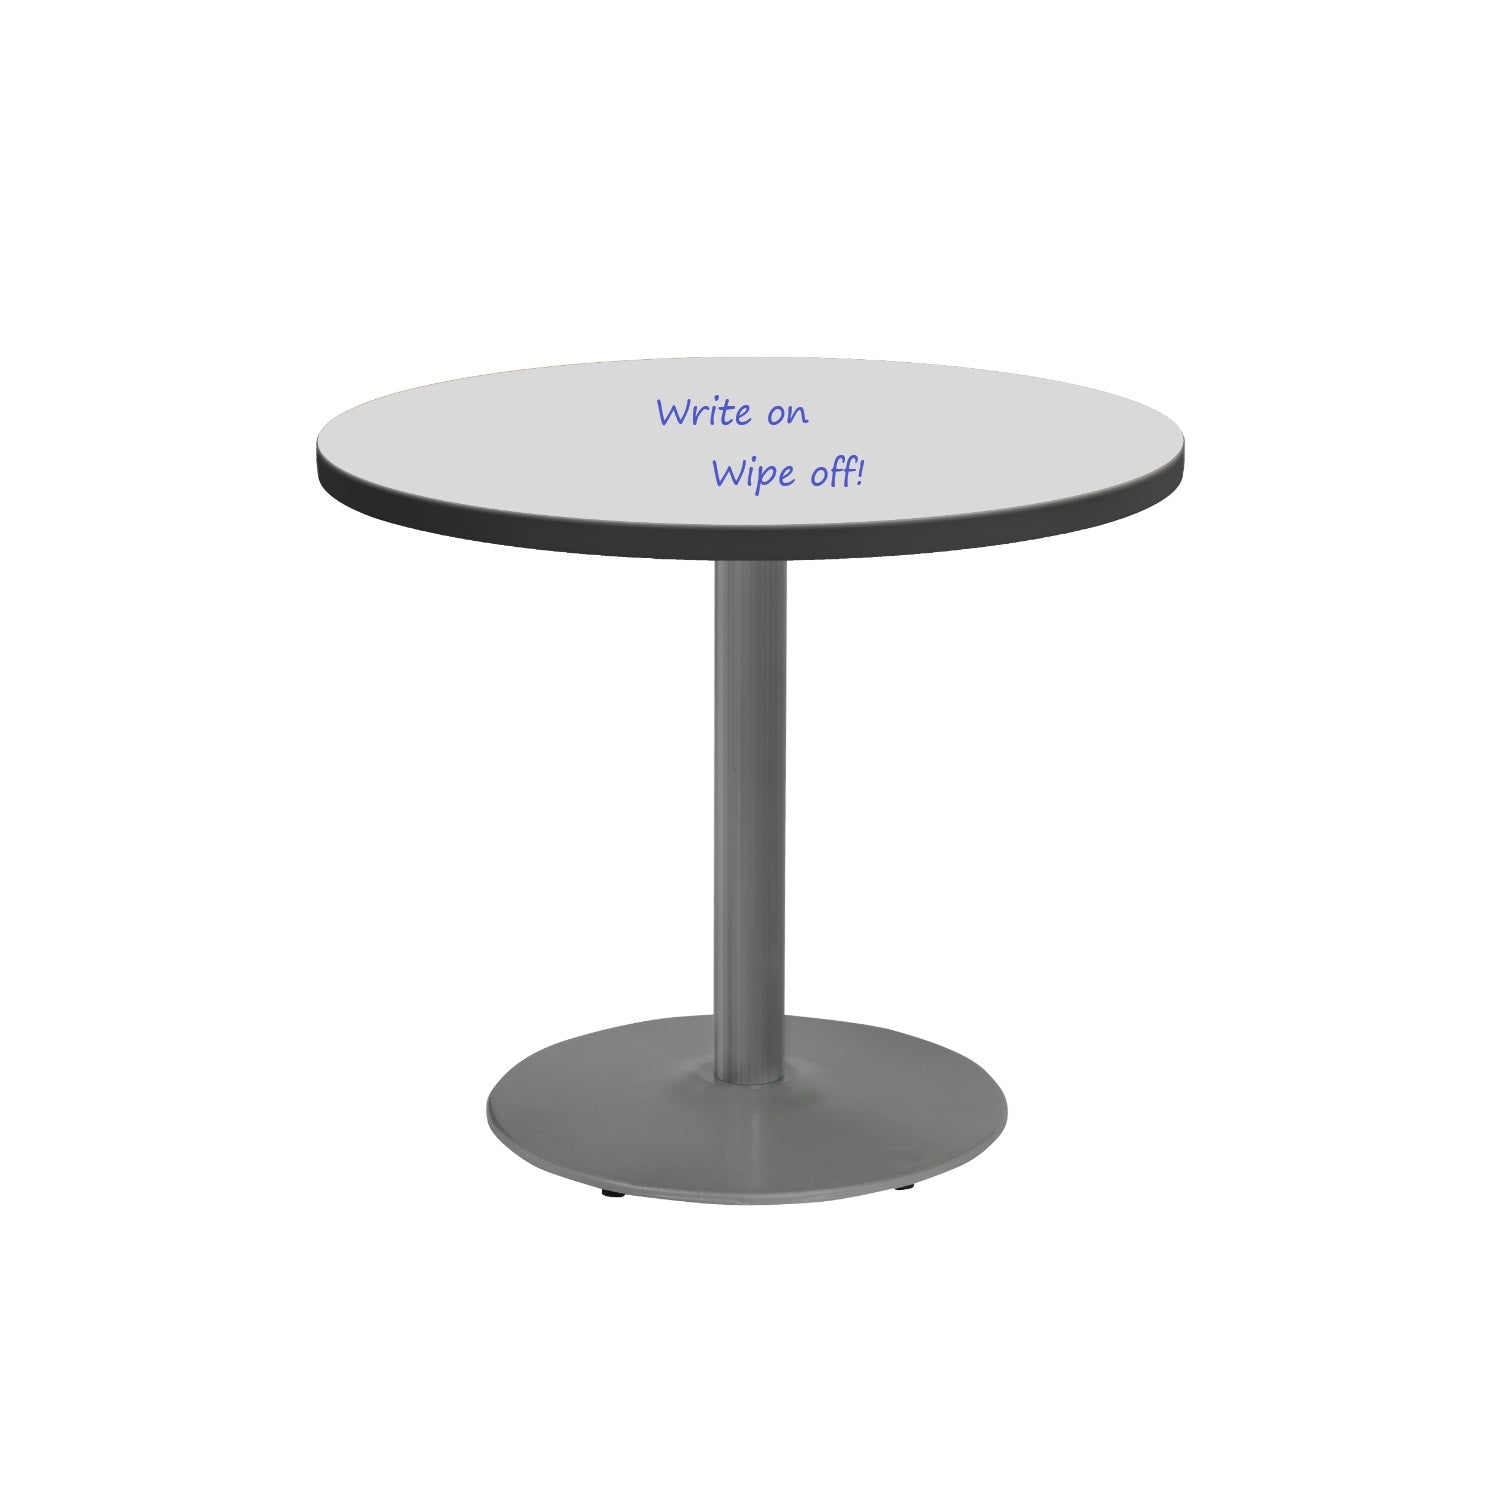 30" Round Sitting Height Café Table with Dry-Erase Laminate Markerboard Top